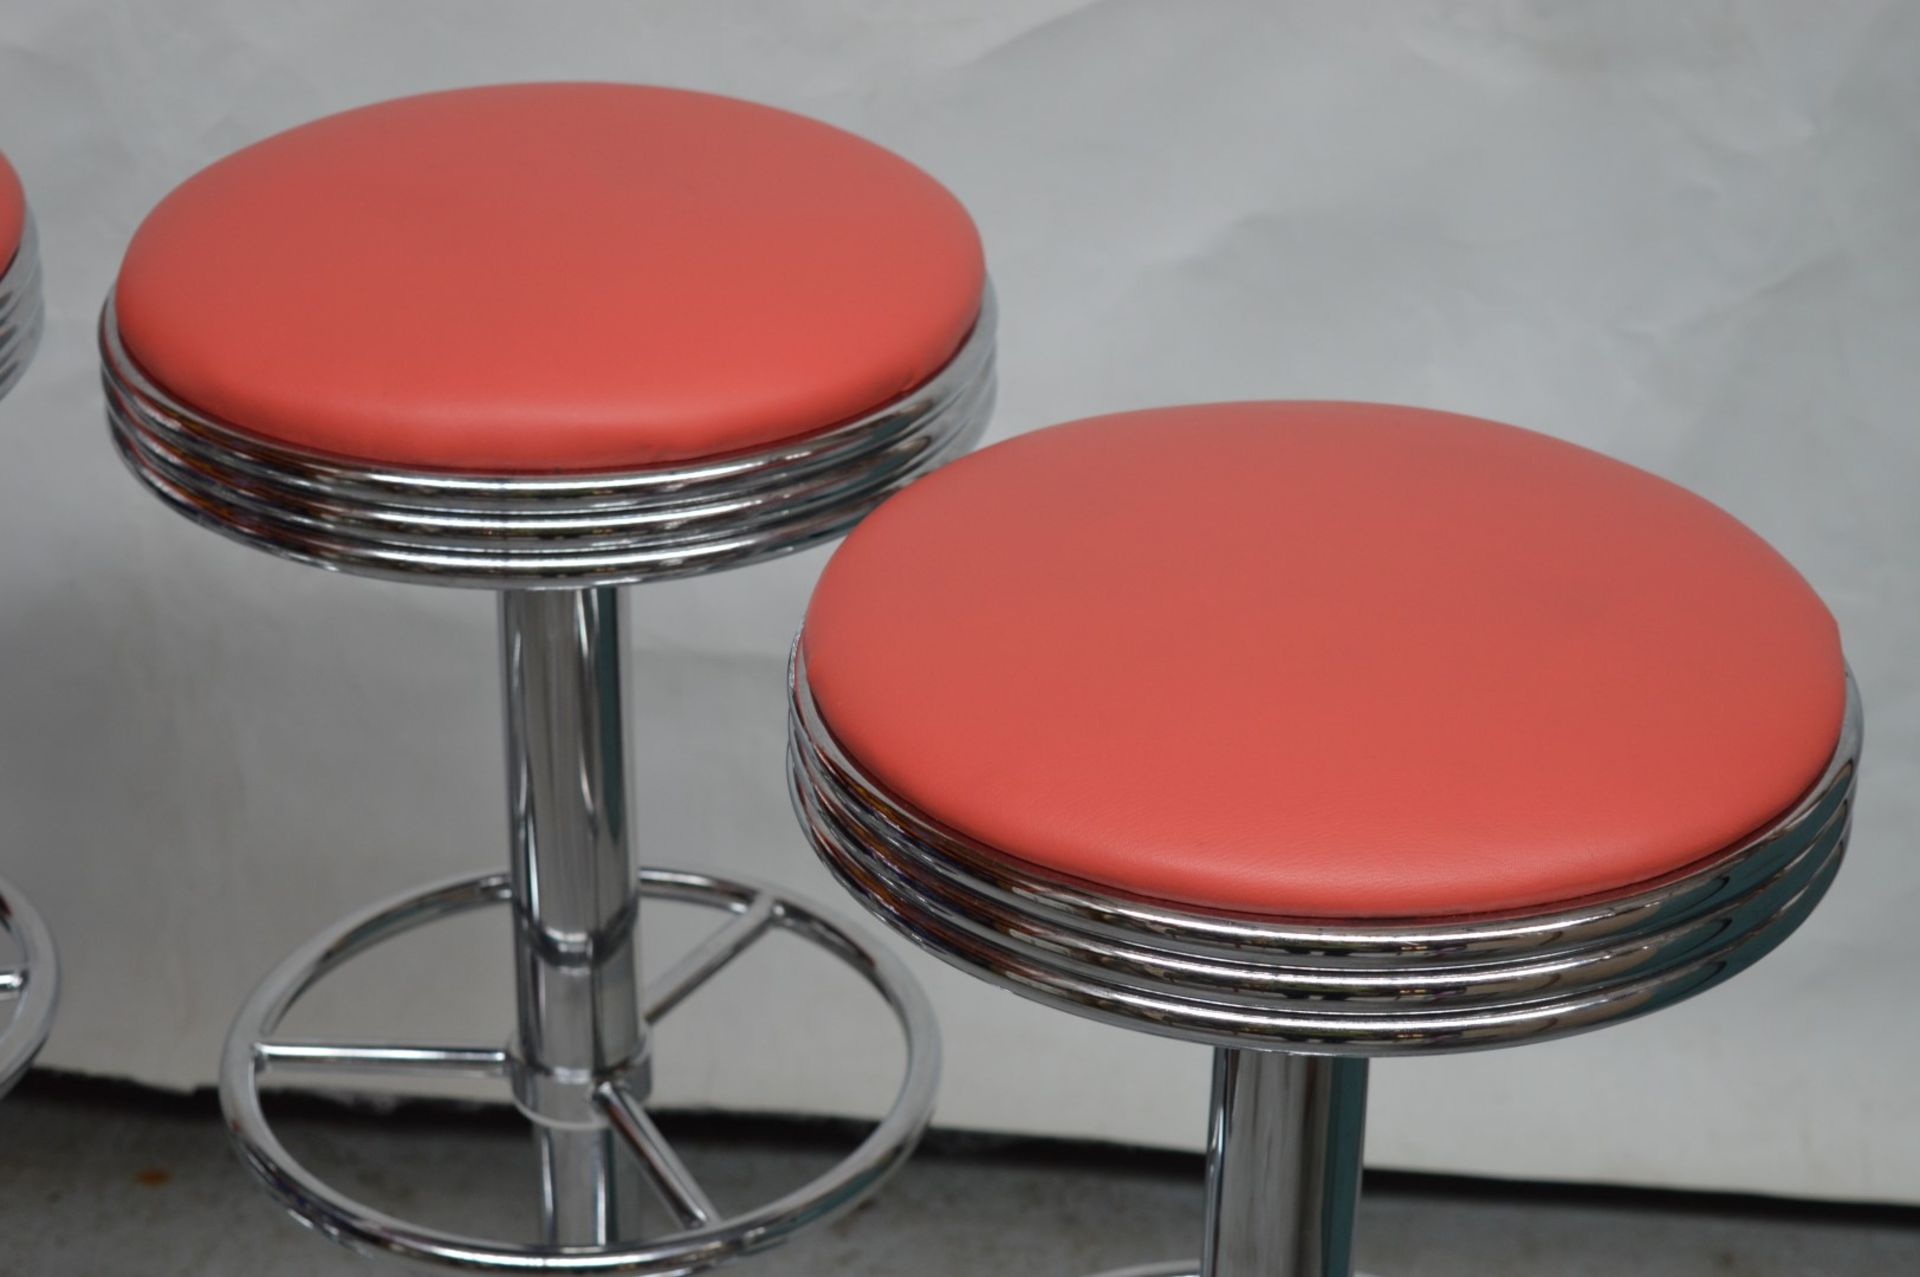 4 x Retro American Roadside Diner Themed Gas Lift Bar Stools - CL164 - Fantastic Stools With Full - Image 6 of 14